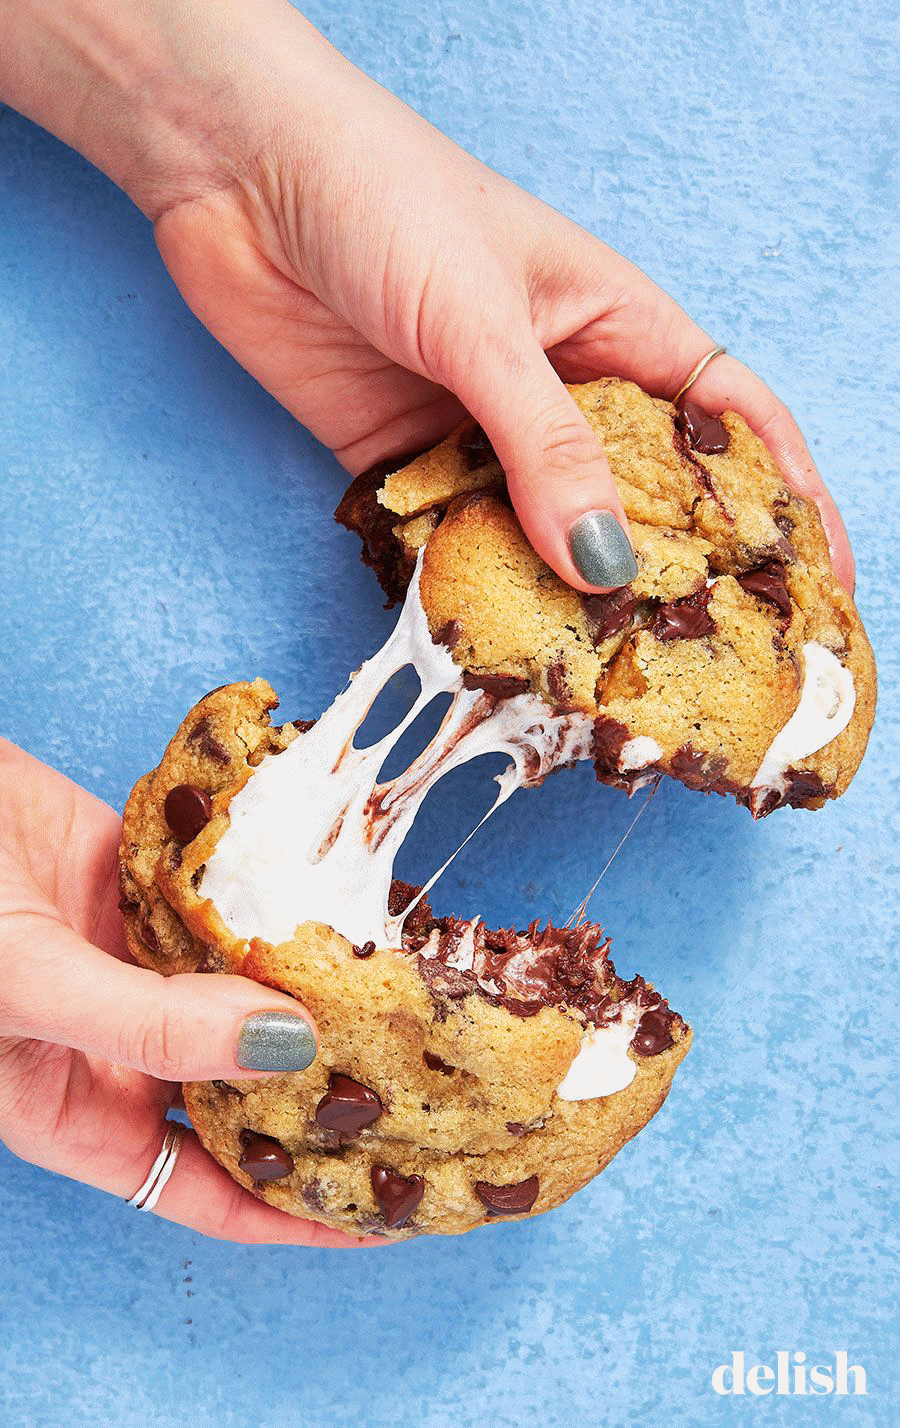 no joke these cookies are stuffed with marshmallow and gif